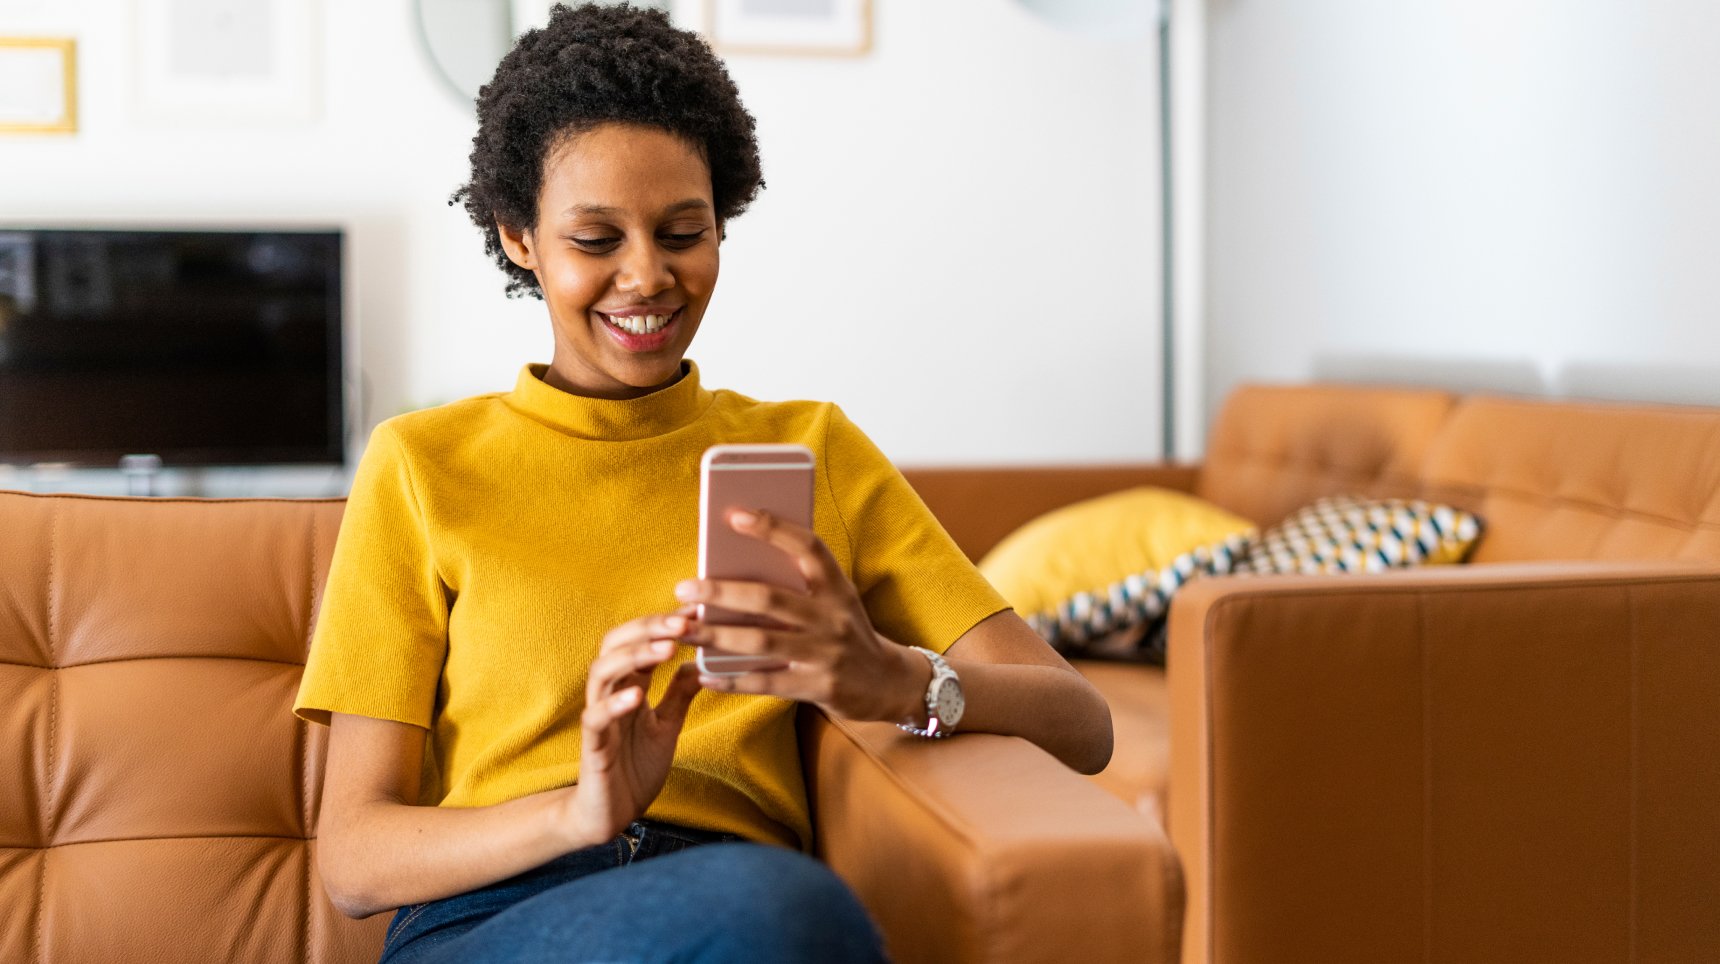 Smiling Woman in Mustard Top on a Cell Phone Sitting on a Caramel Leather Couch